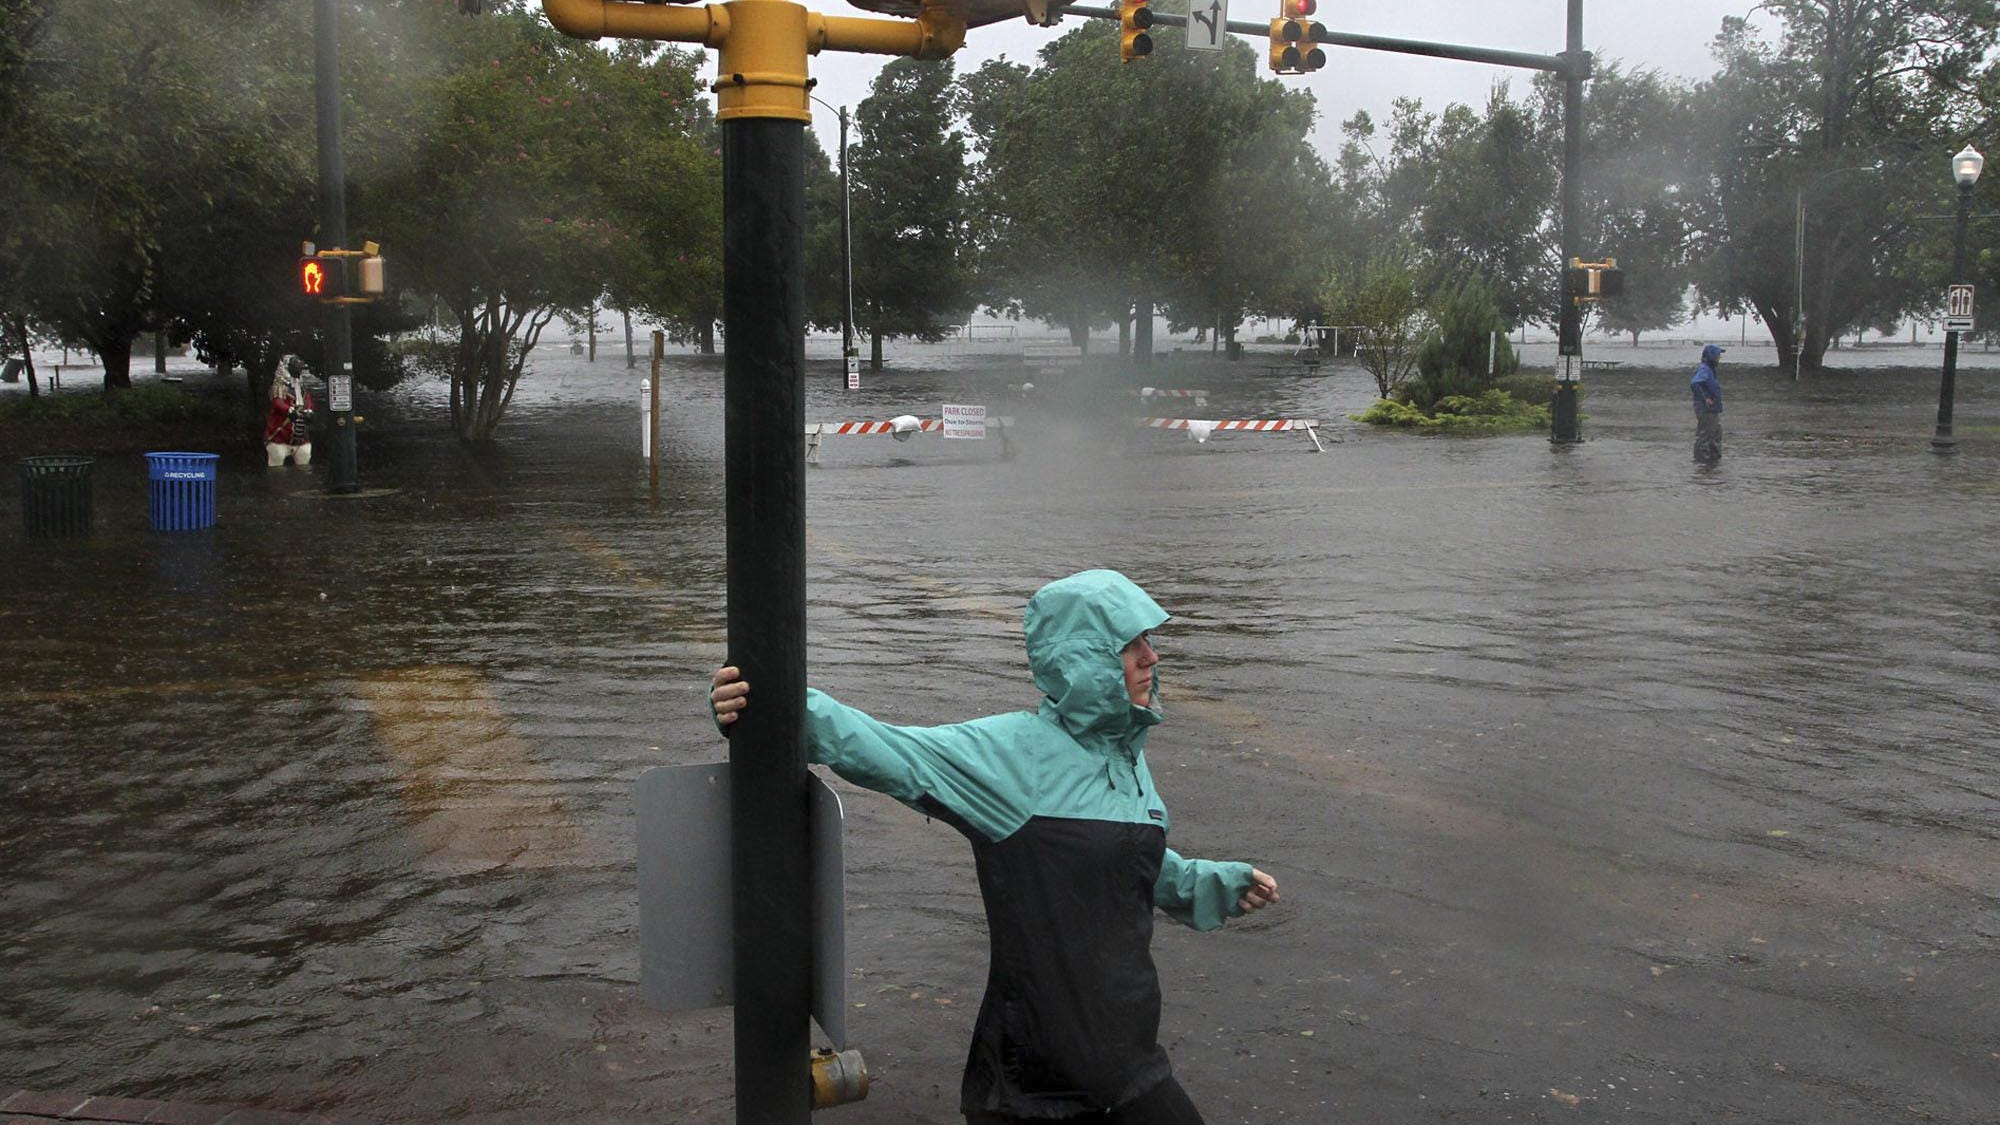 Jamie Thompson walks through flooded sections of East Front Street near Union Point Park in New Bern, N.C. Thursday, Sept. 13, 2018. Hurricane Florence already has inundated coastal streets with ocean water and left tens of thousands without power, and more is to come. (Gray Whitley/Sun Journal via AP)